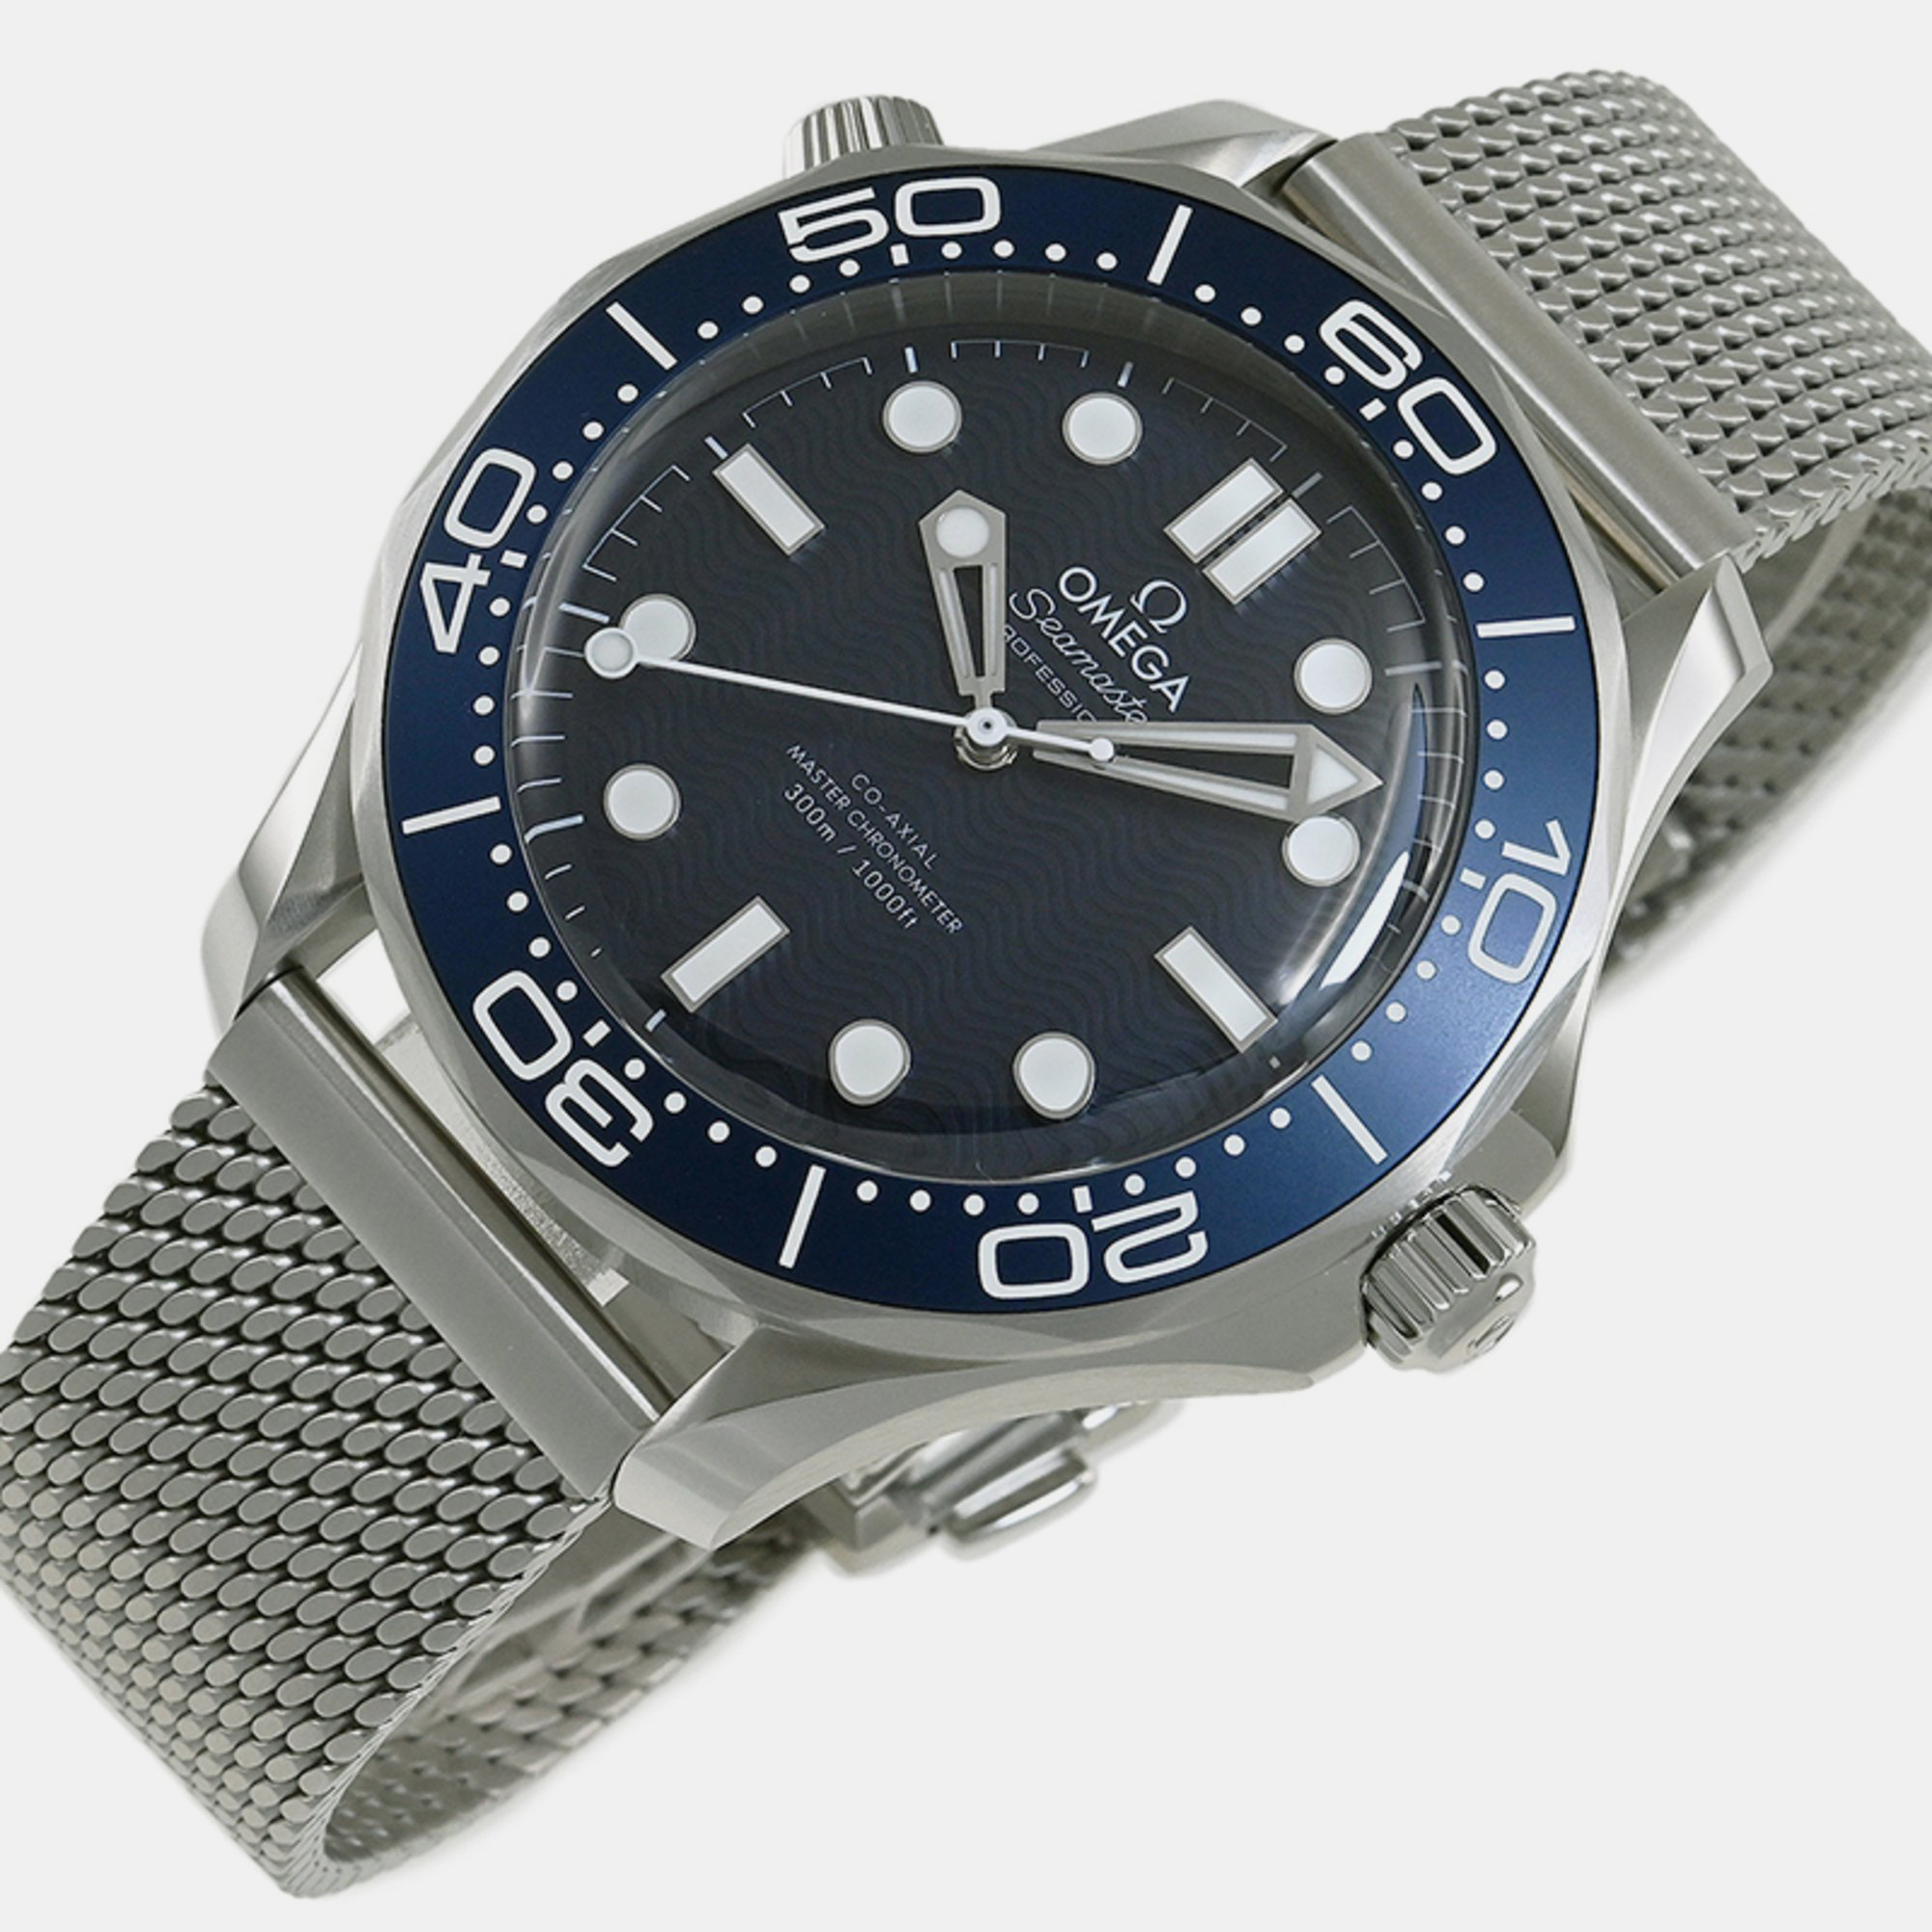 Omega Blue Stainless Steel Seamaster 210.30.42.20.03.002 Automatic Men's Wristwatch 42 Mm